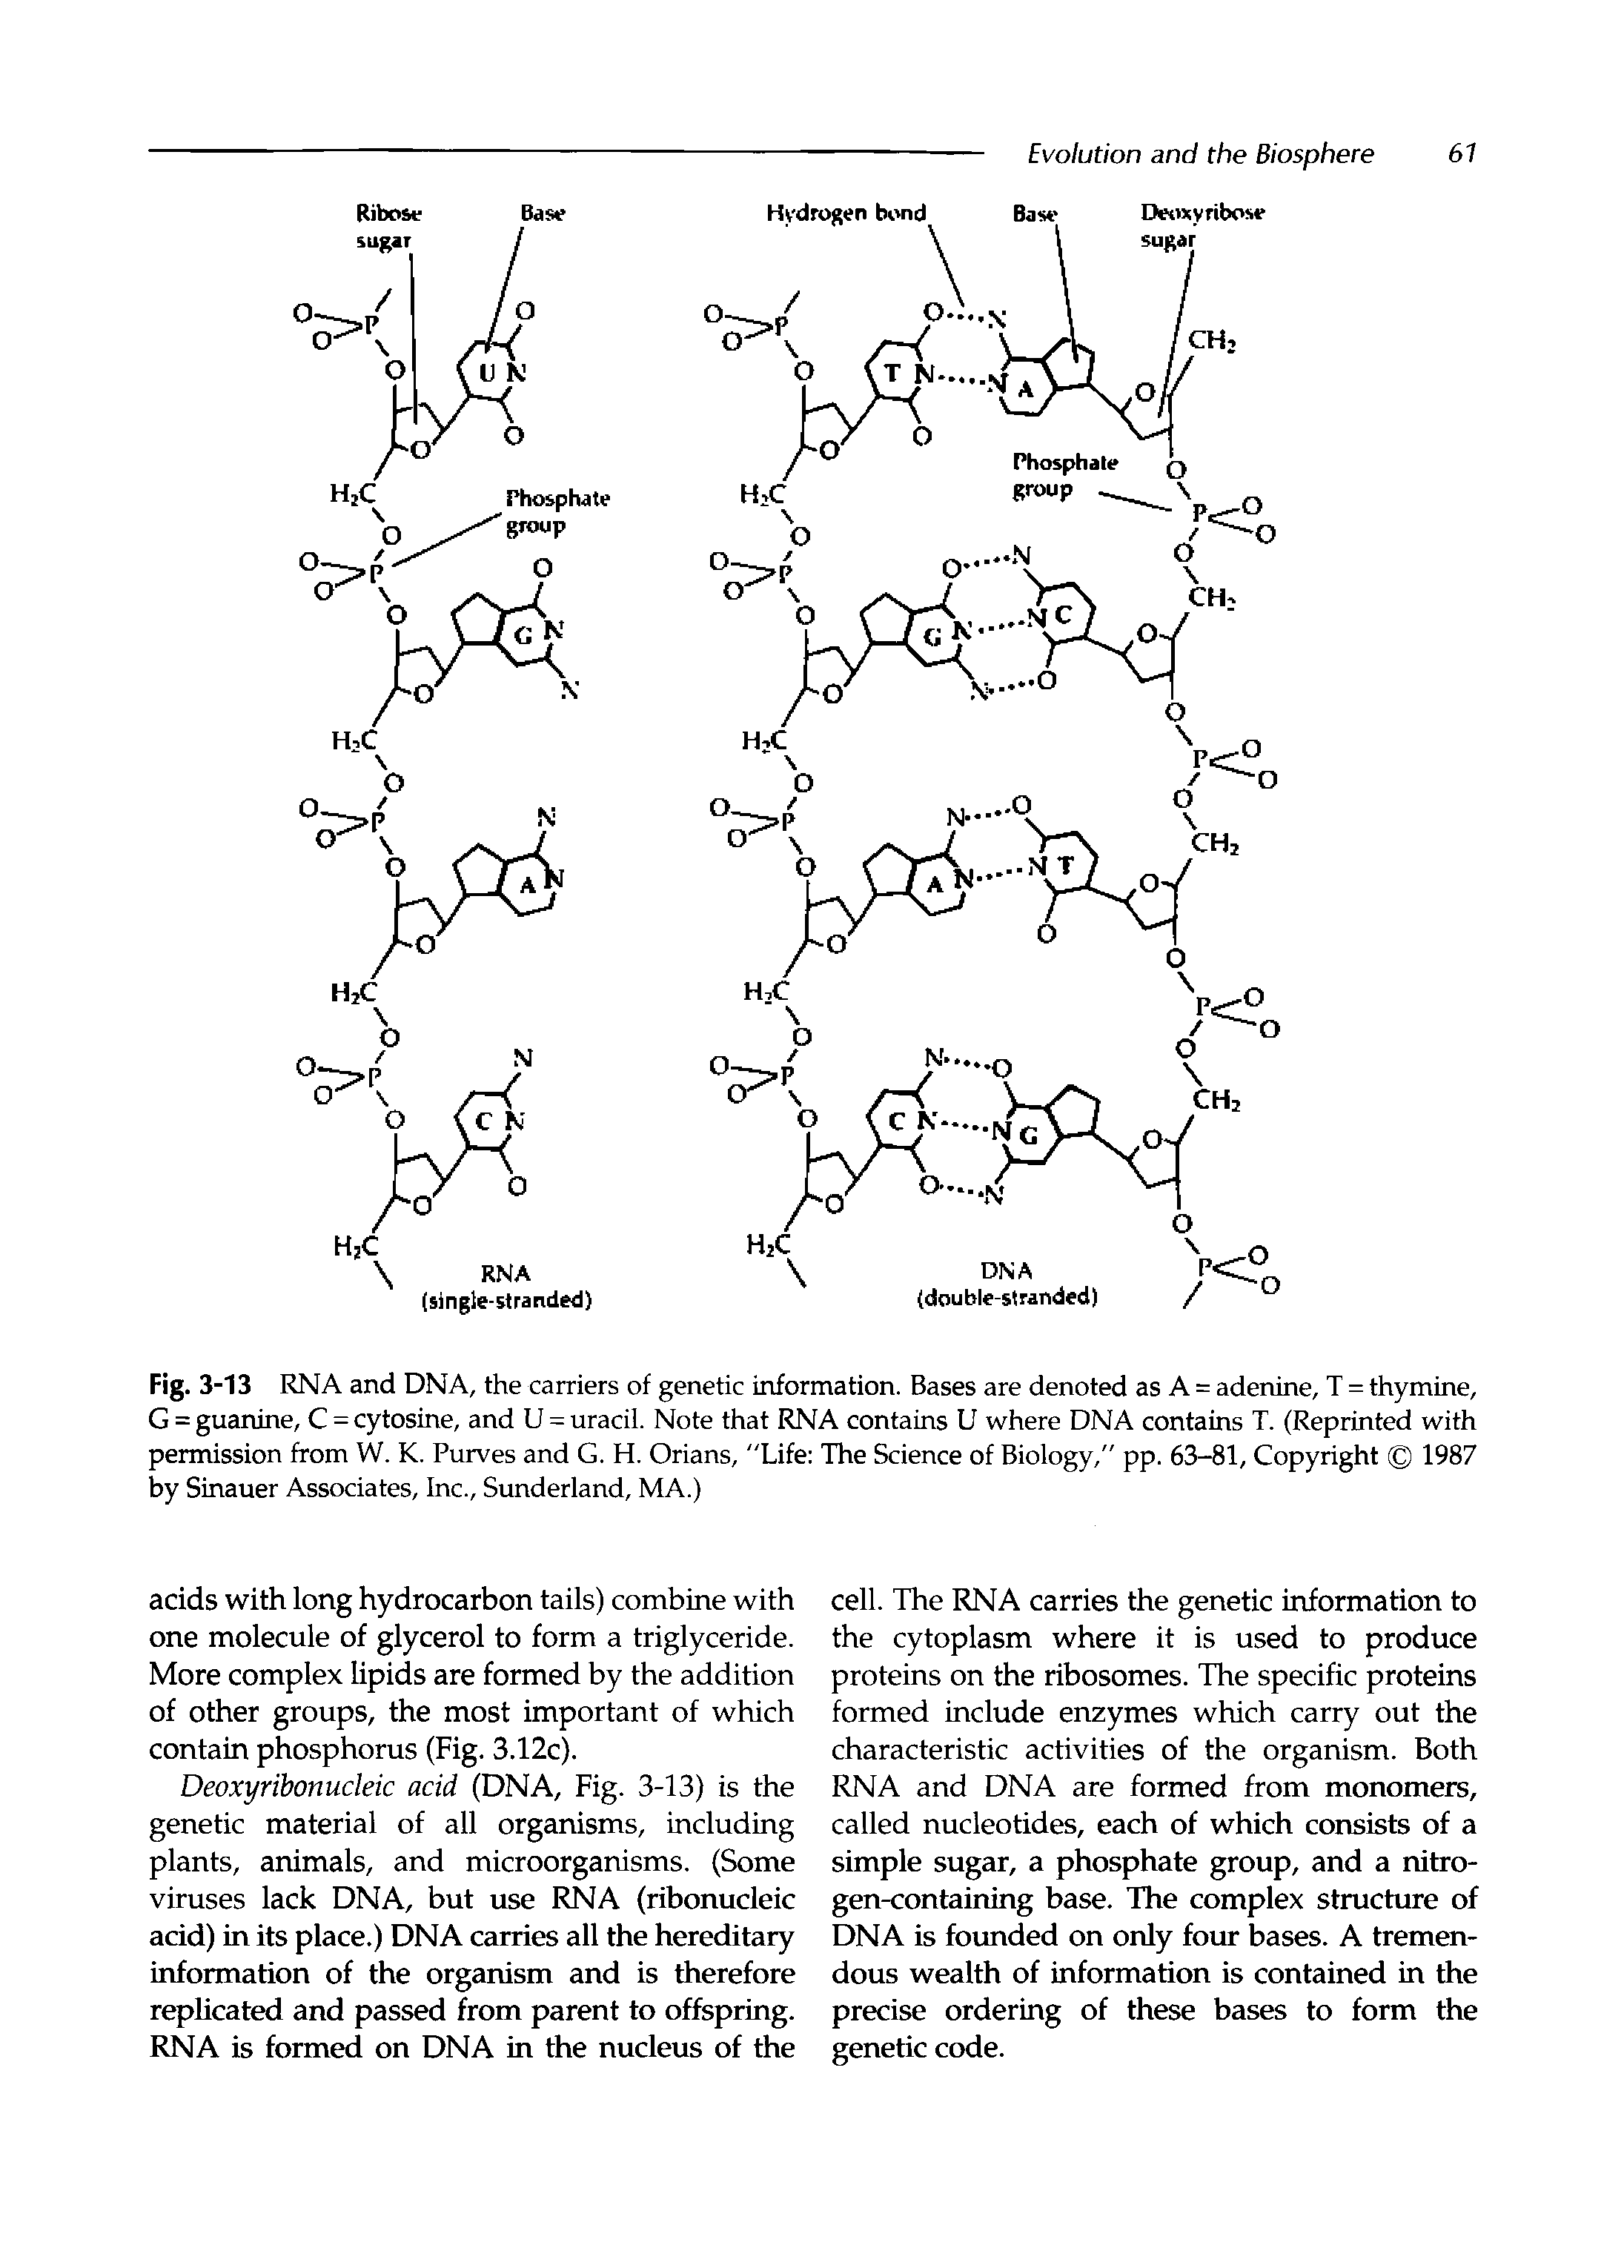 Fig. 3-13 RNA and DNA, the carriers of genetic information. Bases are denoted as A = adenine, T = thymine, G = guanine, C = cytosine, and U = uracil. Note that RNA contains U where DNA contains T. (Reprinted with permission from W. K. Purves and G. H. Orians, "Life The Science of Biology," pp. 63-81, Copyright 1987 by Sinauer Associates, Inc., Sunderland, MA.)...